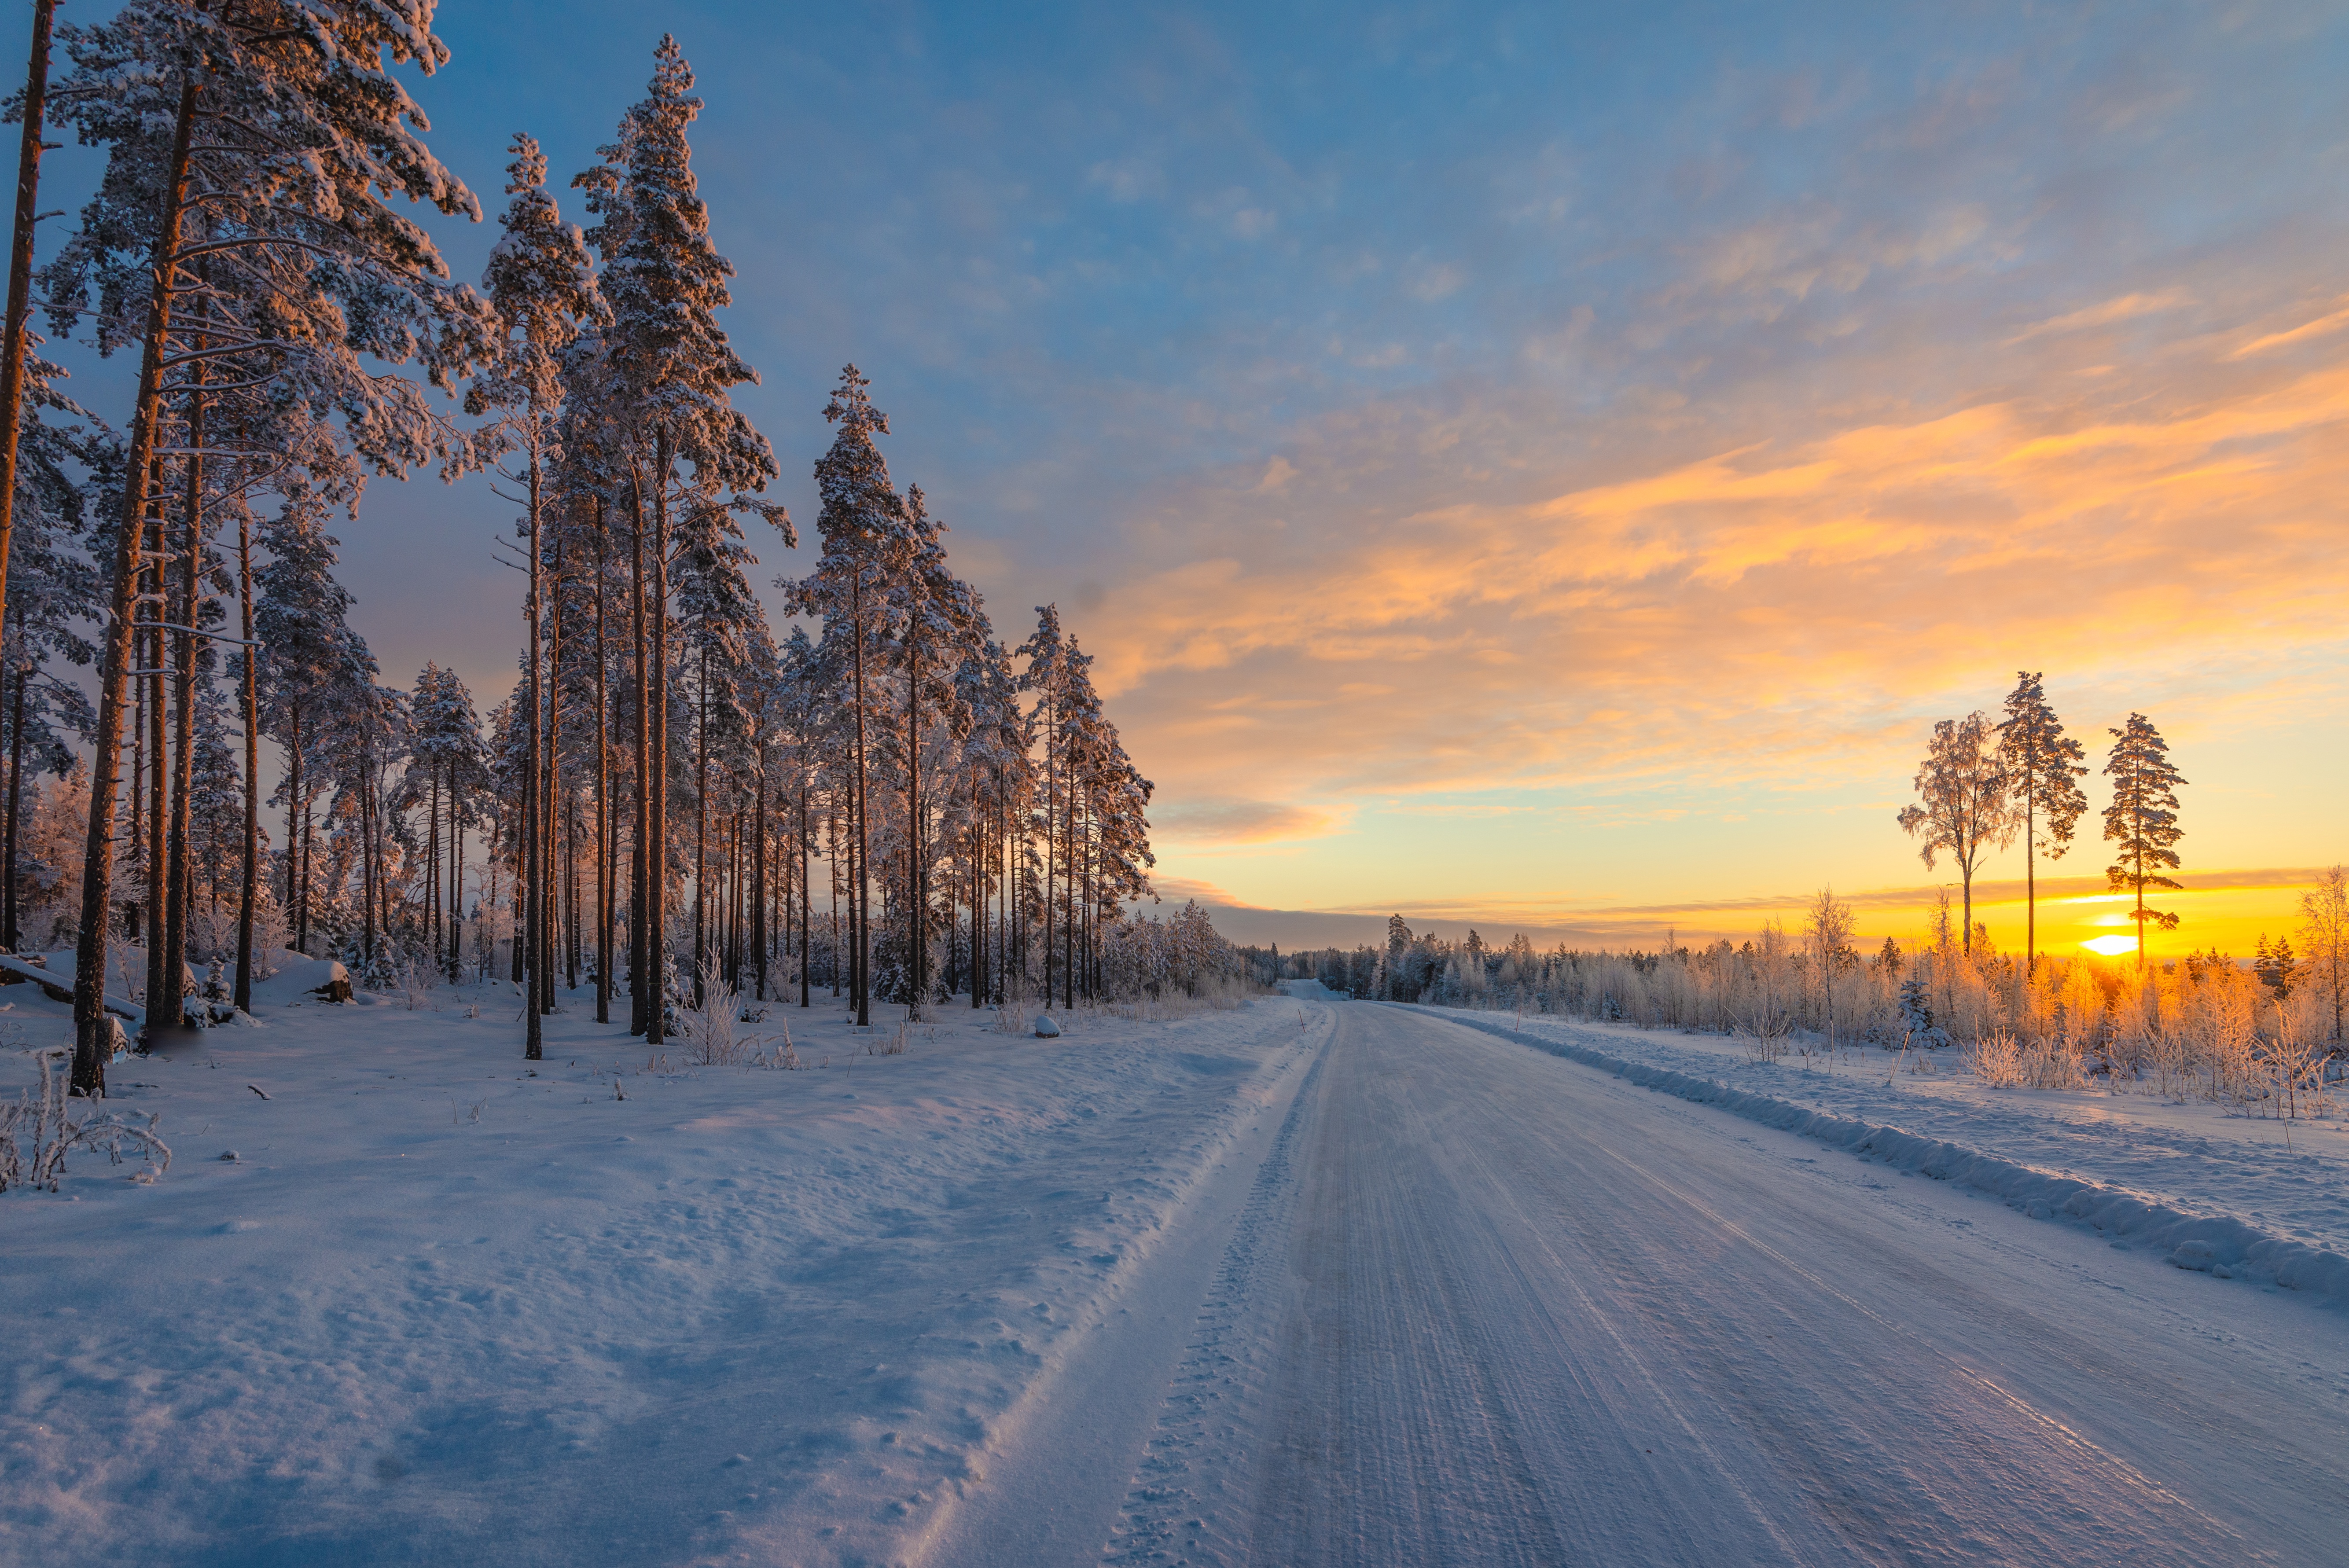 General 5337x3563 Finland winter snow trees sunset road sky clouds pine trees nature landscape